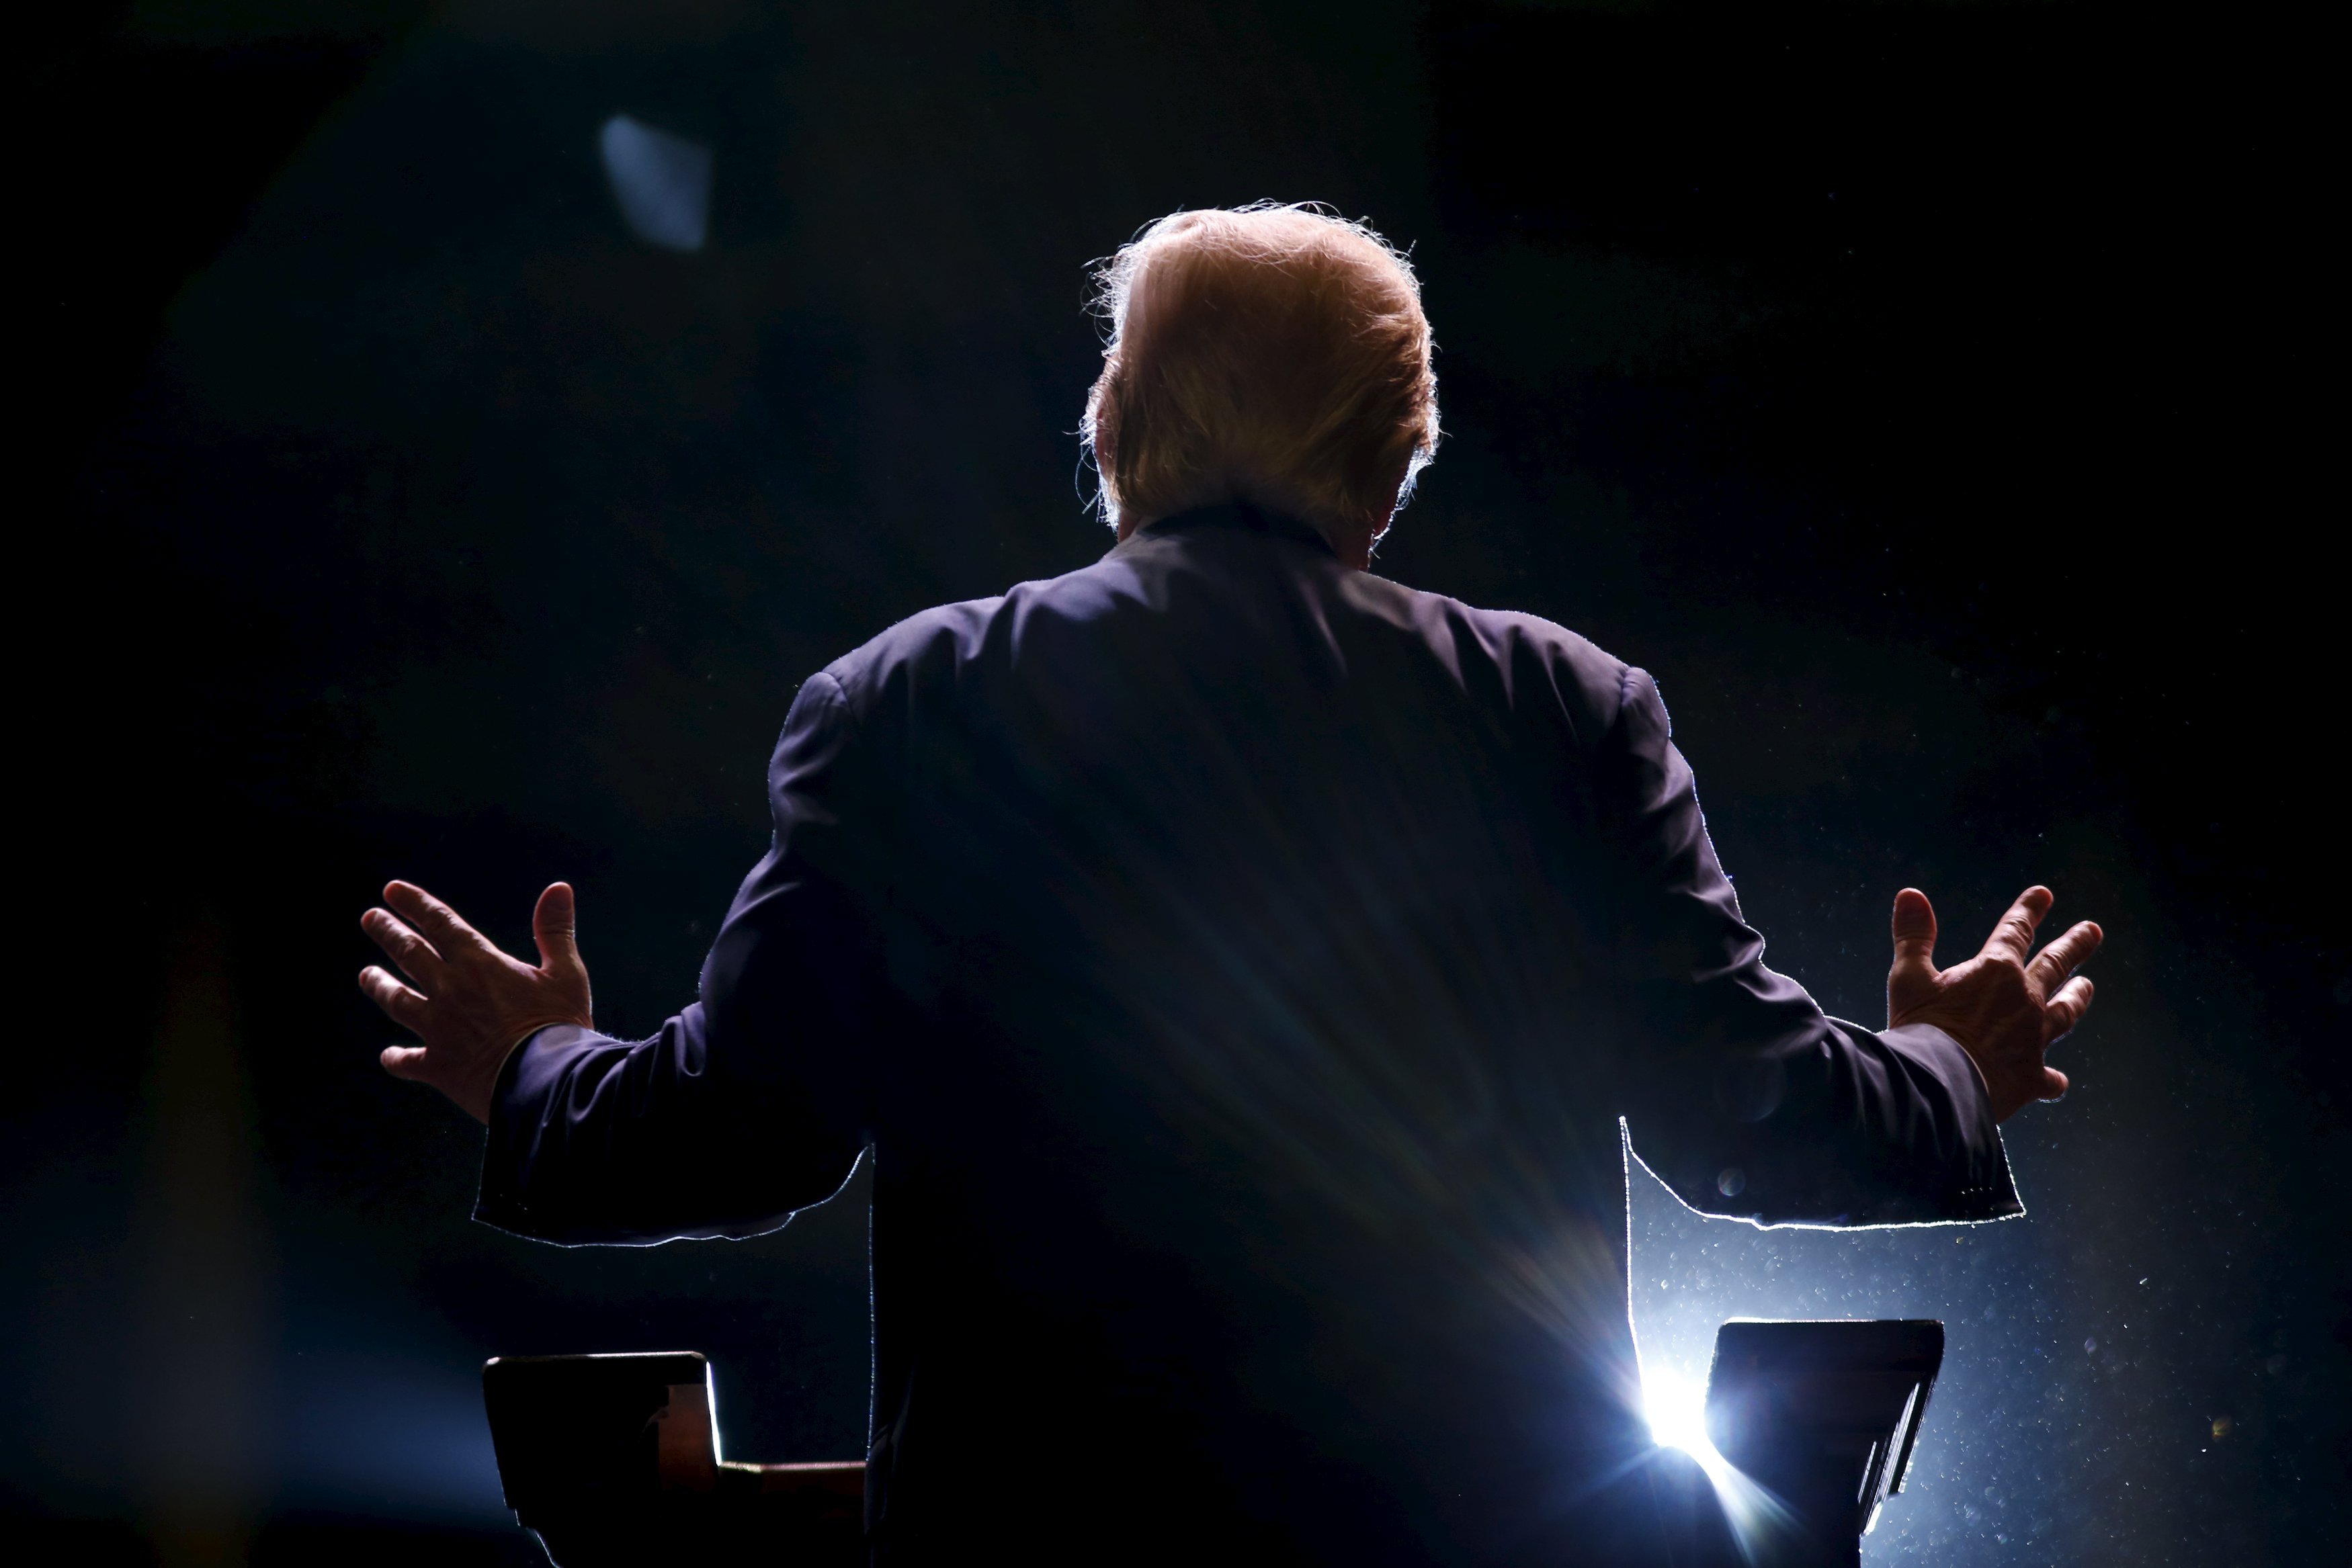 Donald Trump addresses a Trump for President campaign rally in Macon, GA on Nov. 30, 2015. (Christopher Aluka Berry—Reuters)